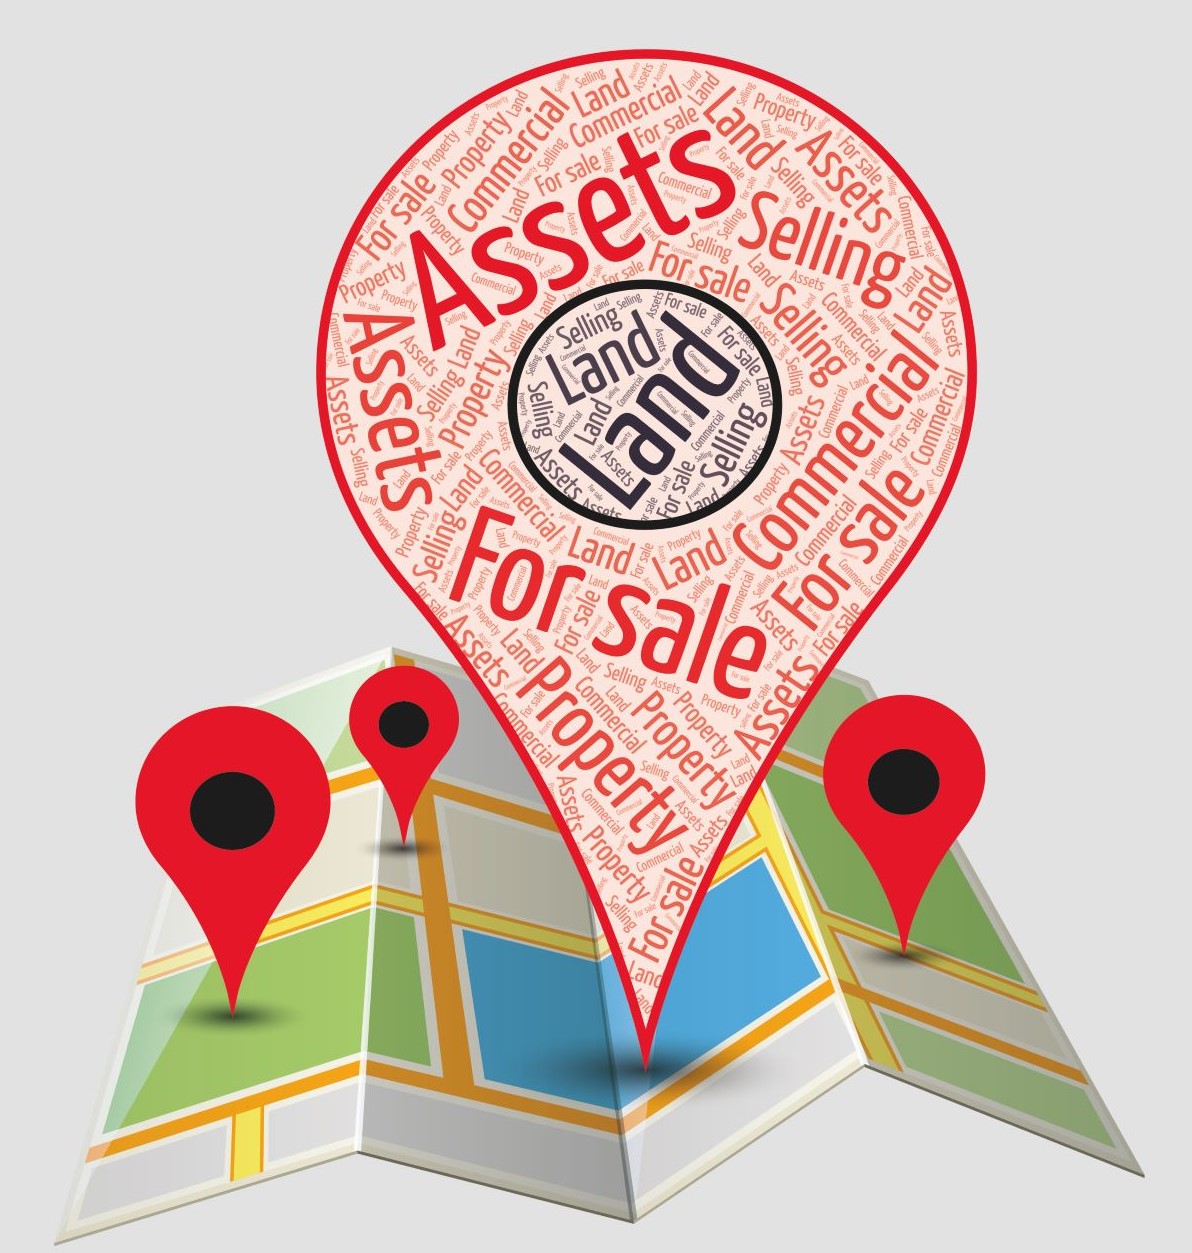 Map pin - part of the assets disposal campaign